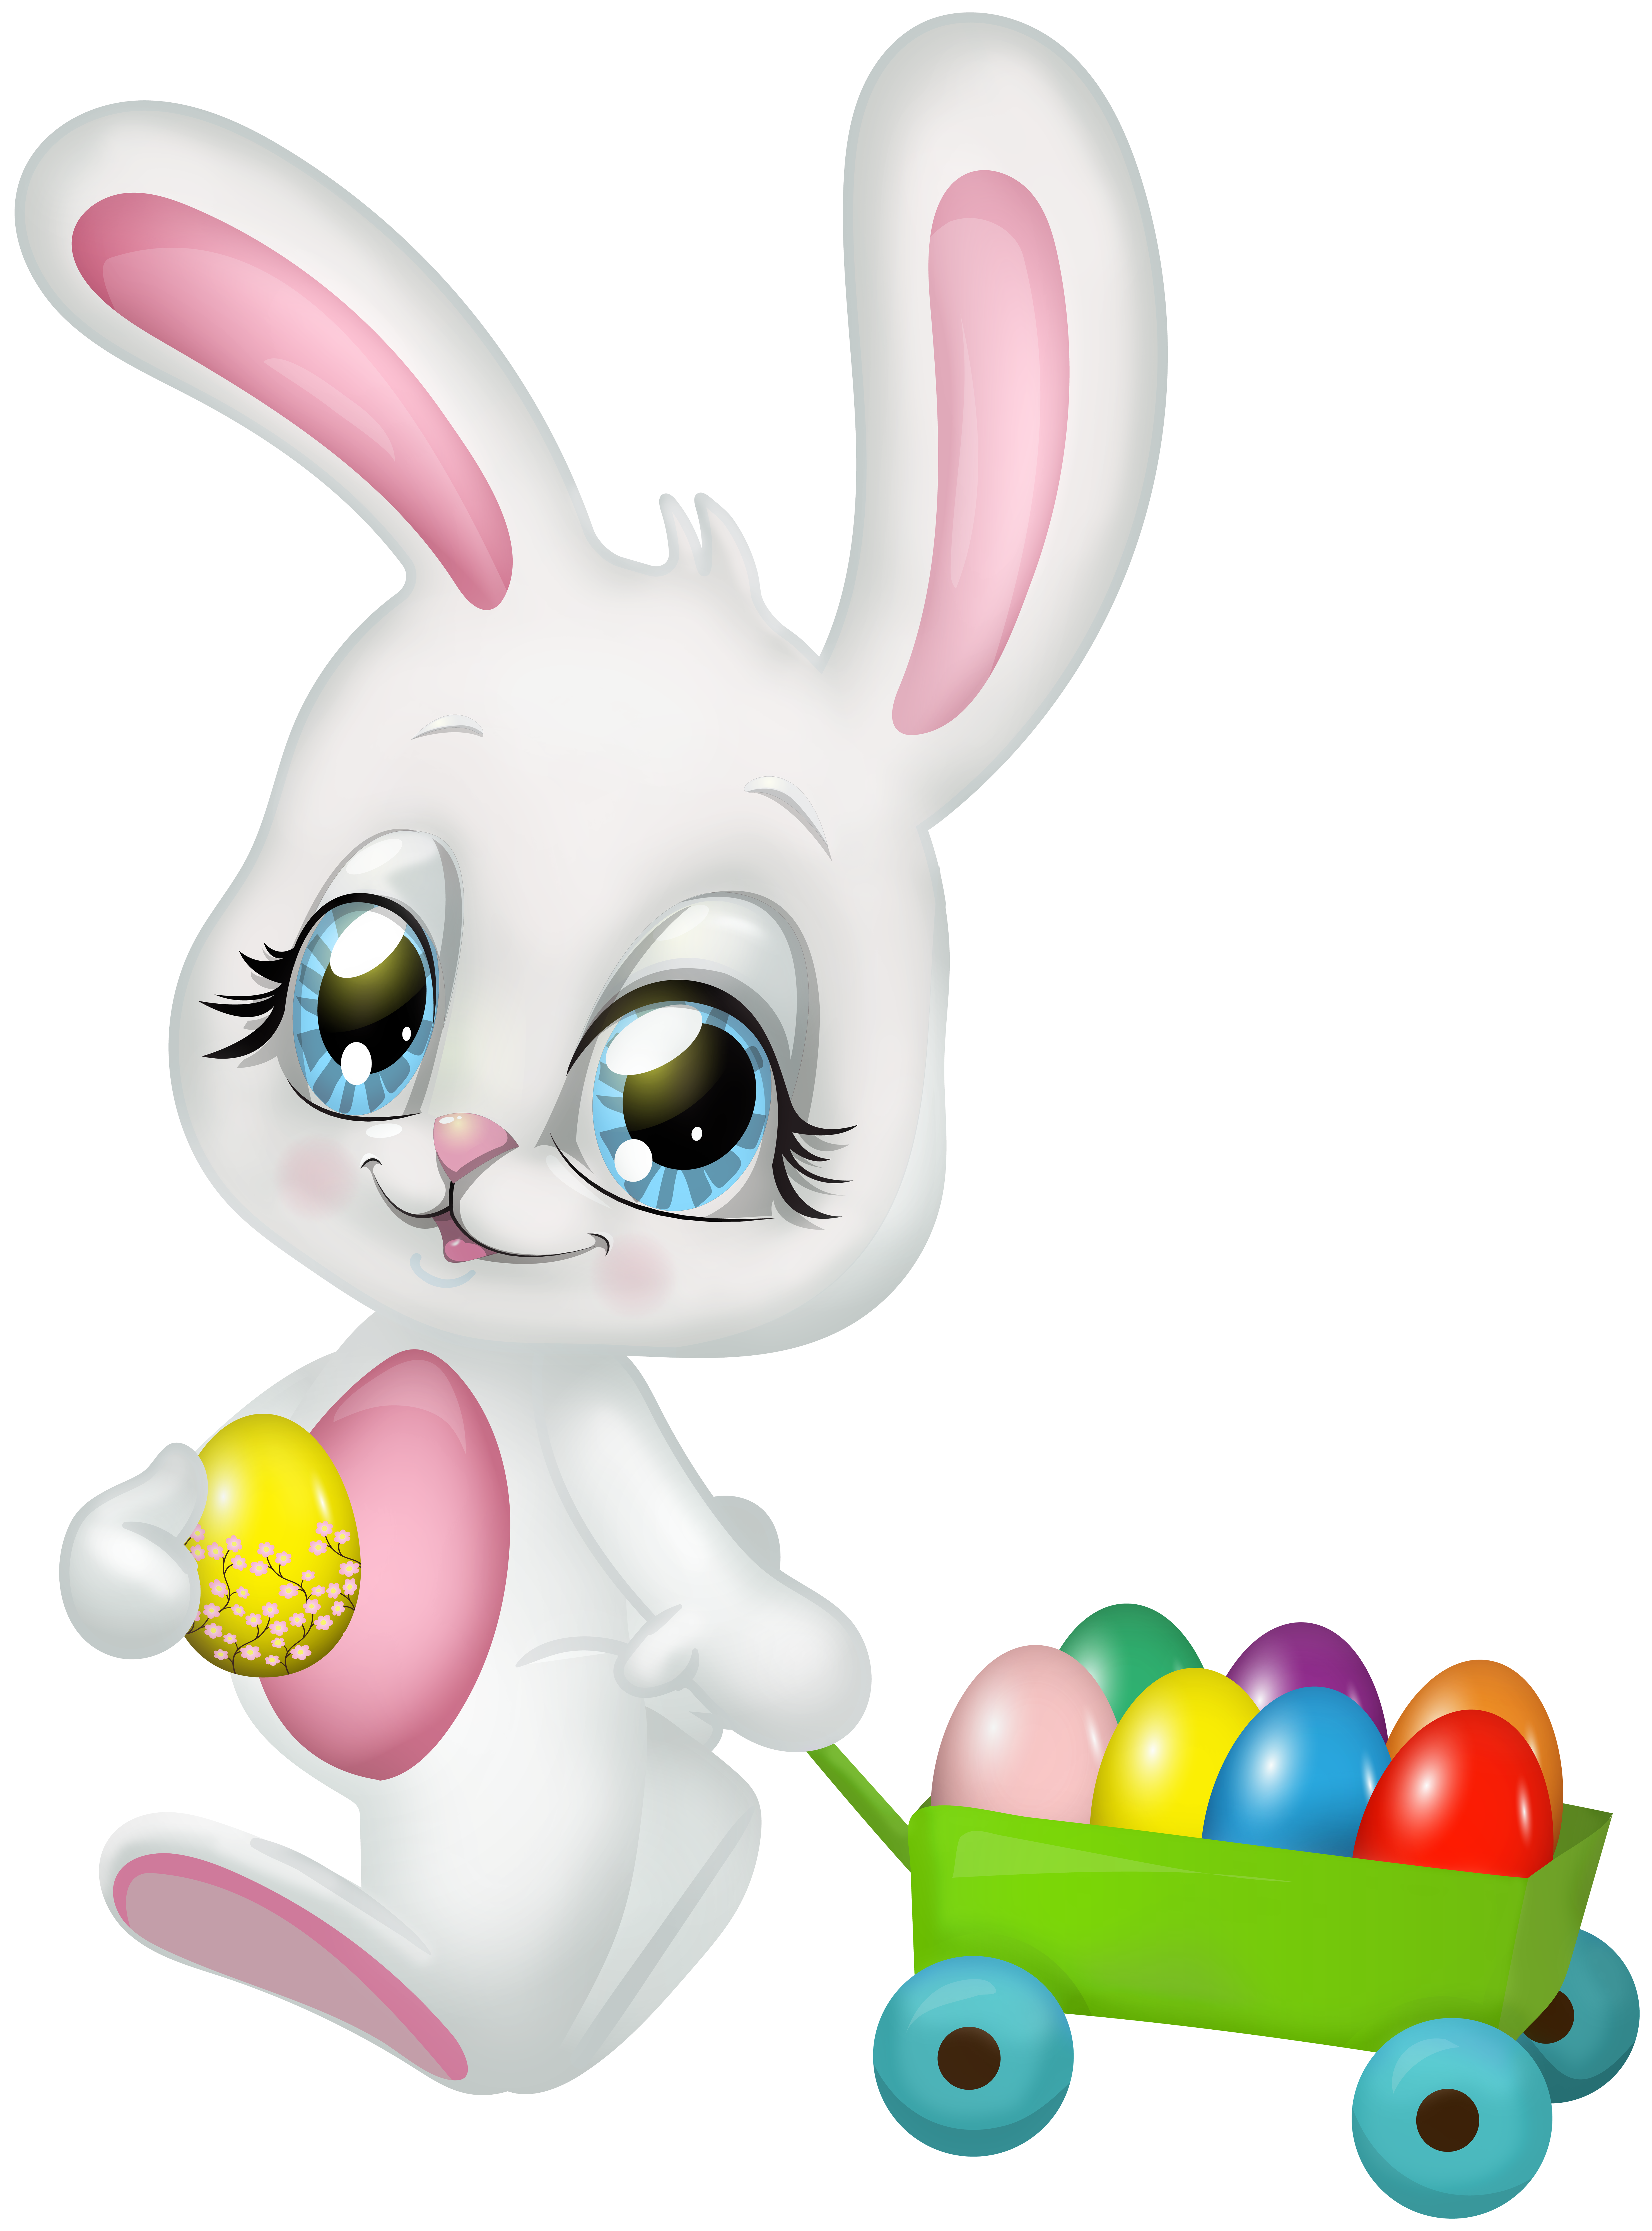 cute easter images